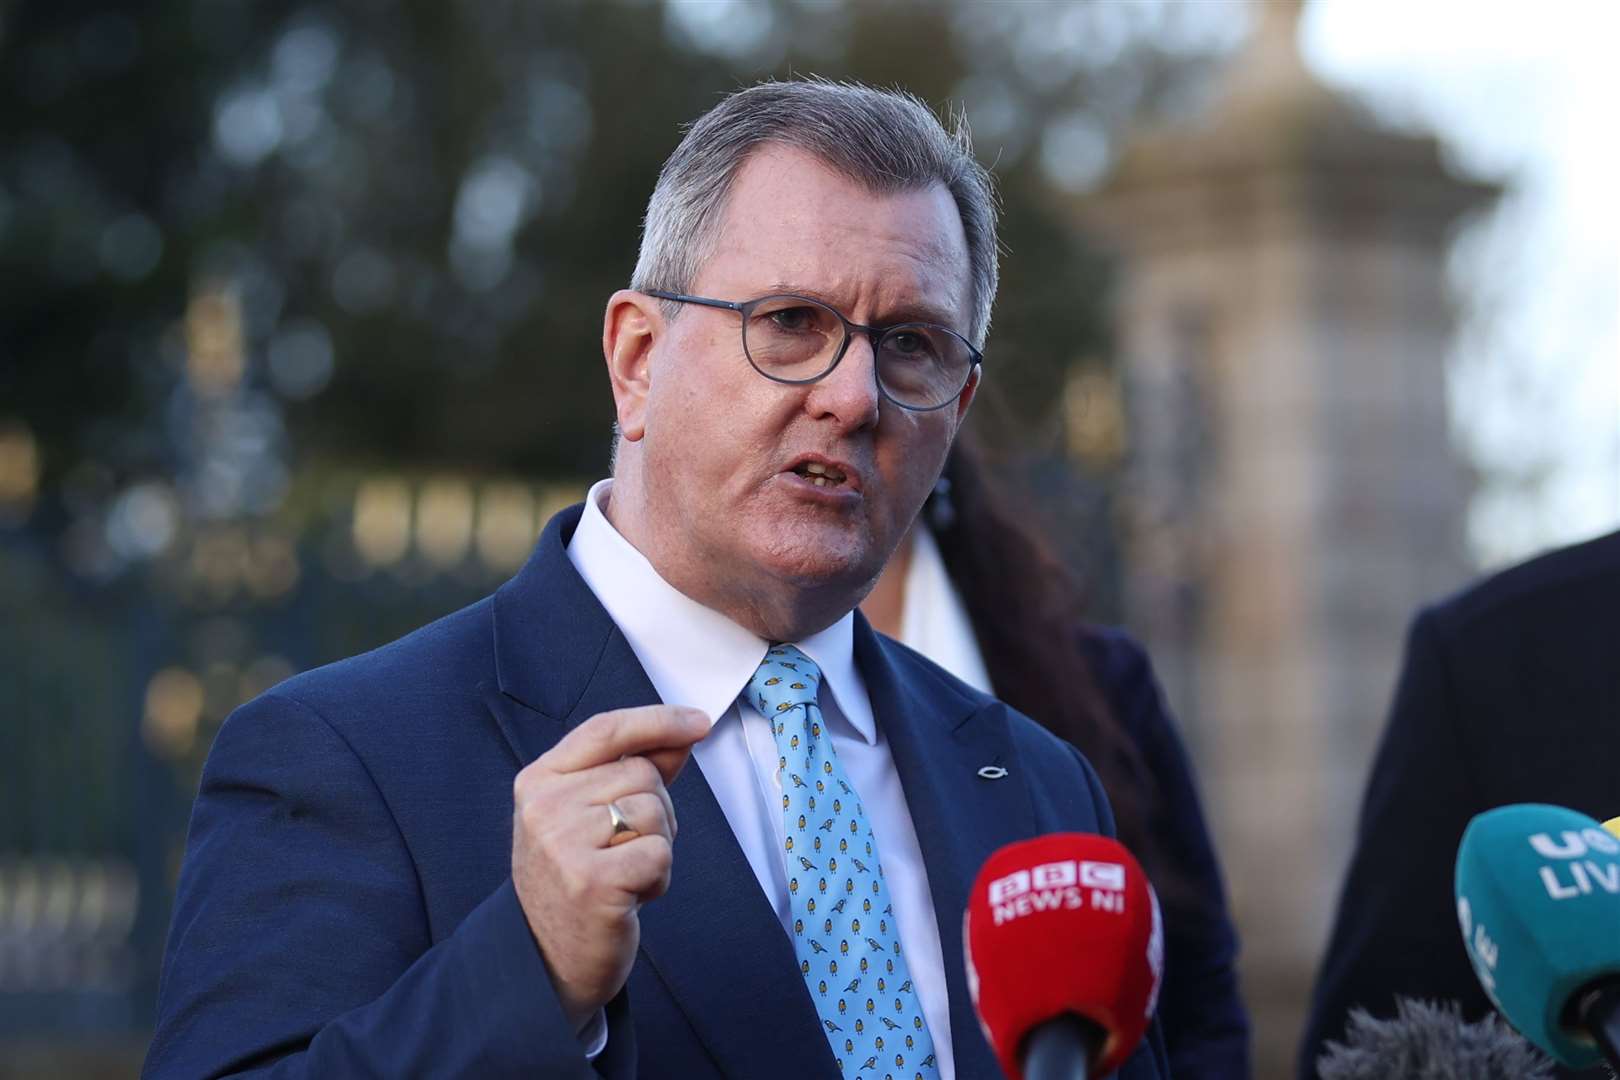 DUP leader Sir Jeffrey Donaldson has insisted his party has yet to reach an agreement with the Government over post-Brexit trading arrangements (Liam McBurney/PA)